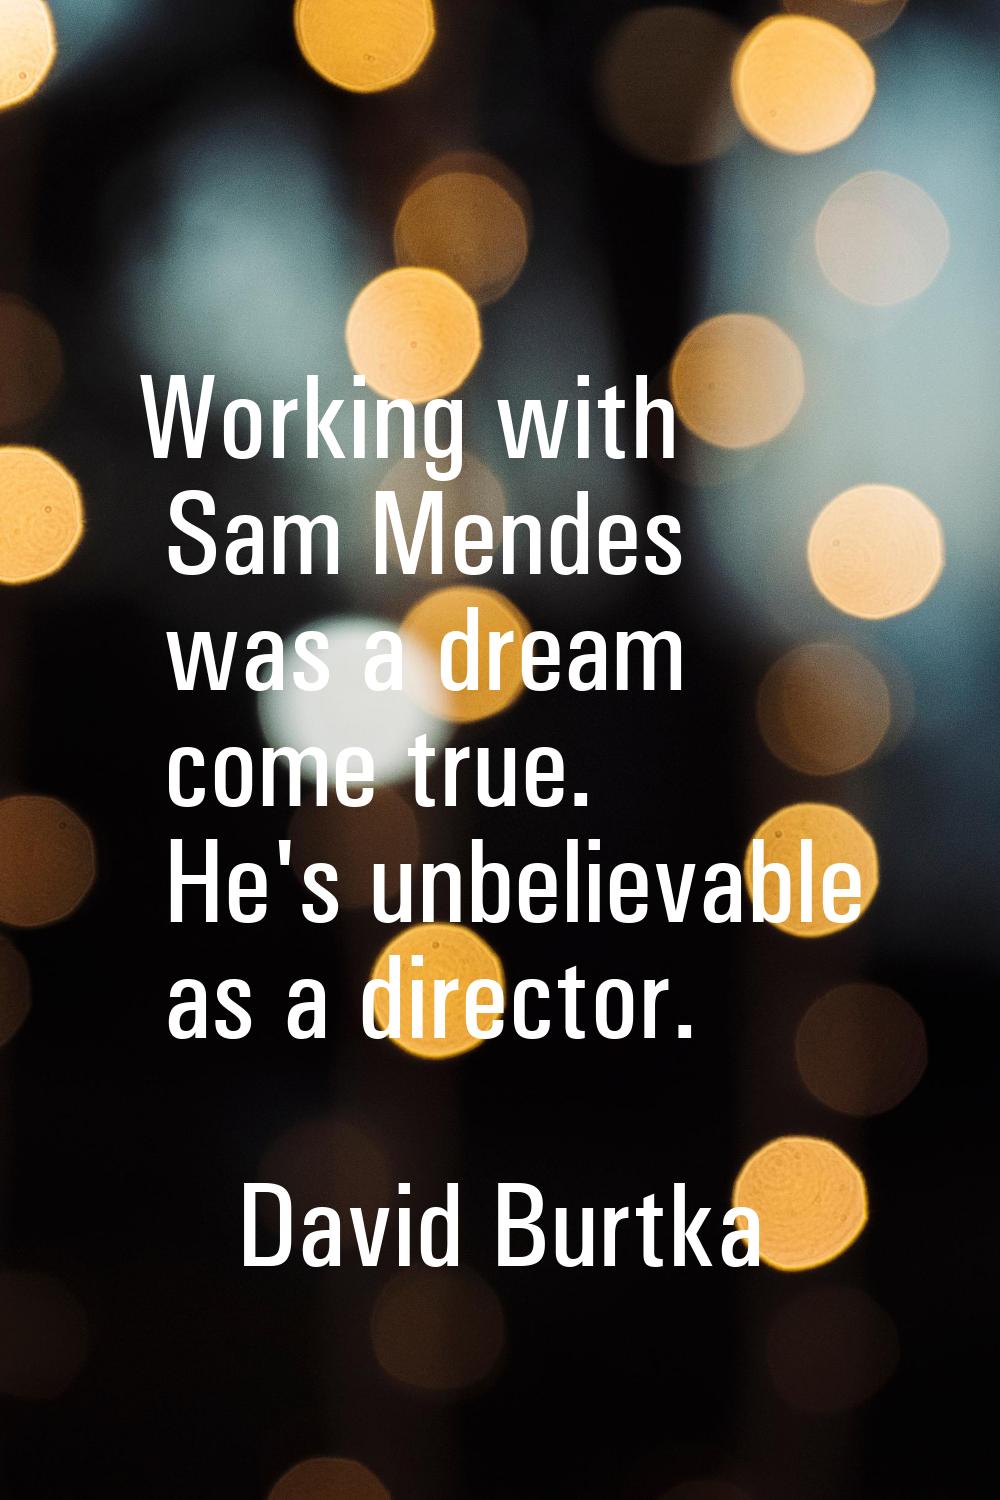 Working with Sam Mendes was a dream come true. He's unbelievable as a director.